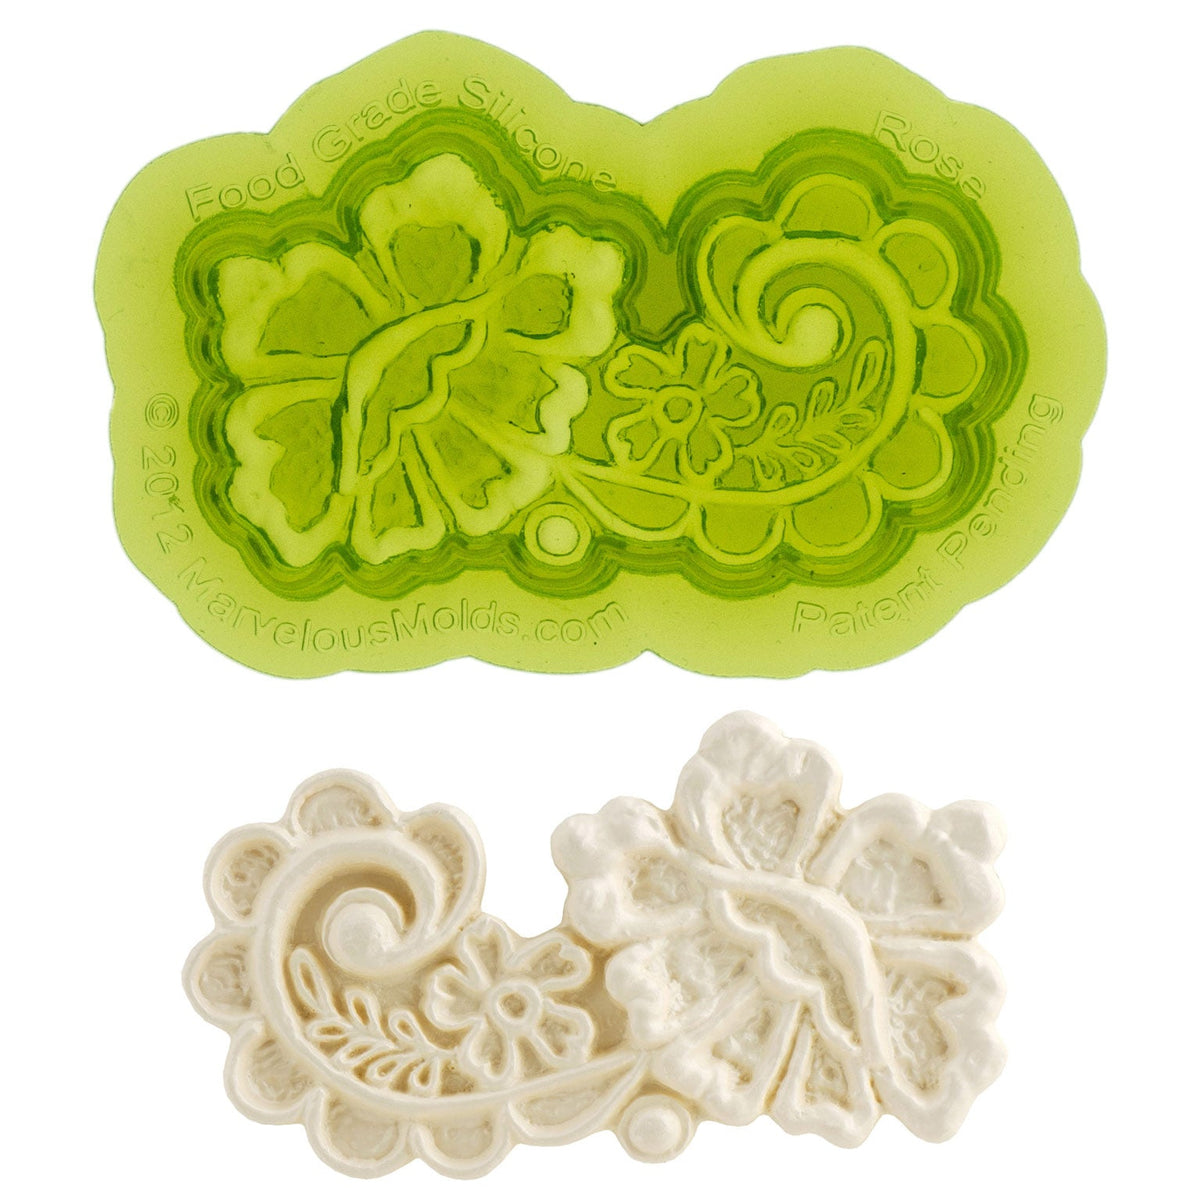 Rose Lace Food Safe Silicone Mold for Fondant Cake Decorating by Marvelous Molds